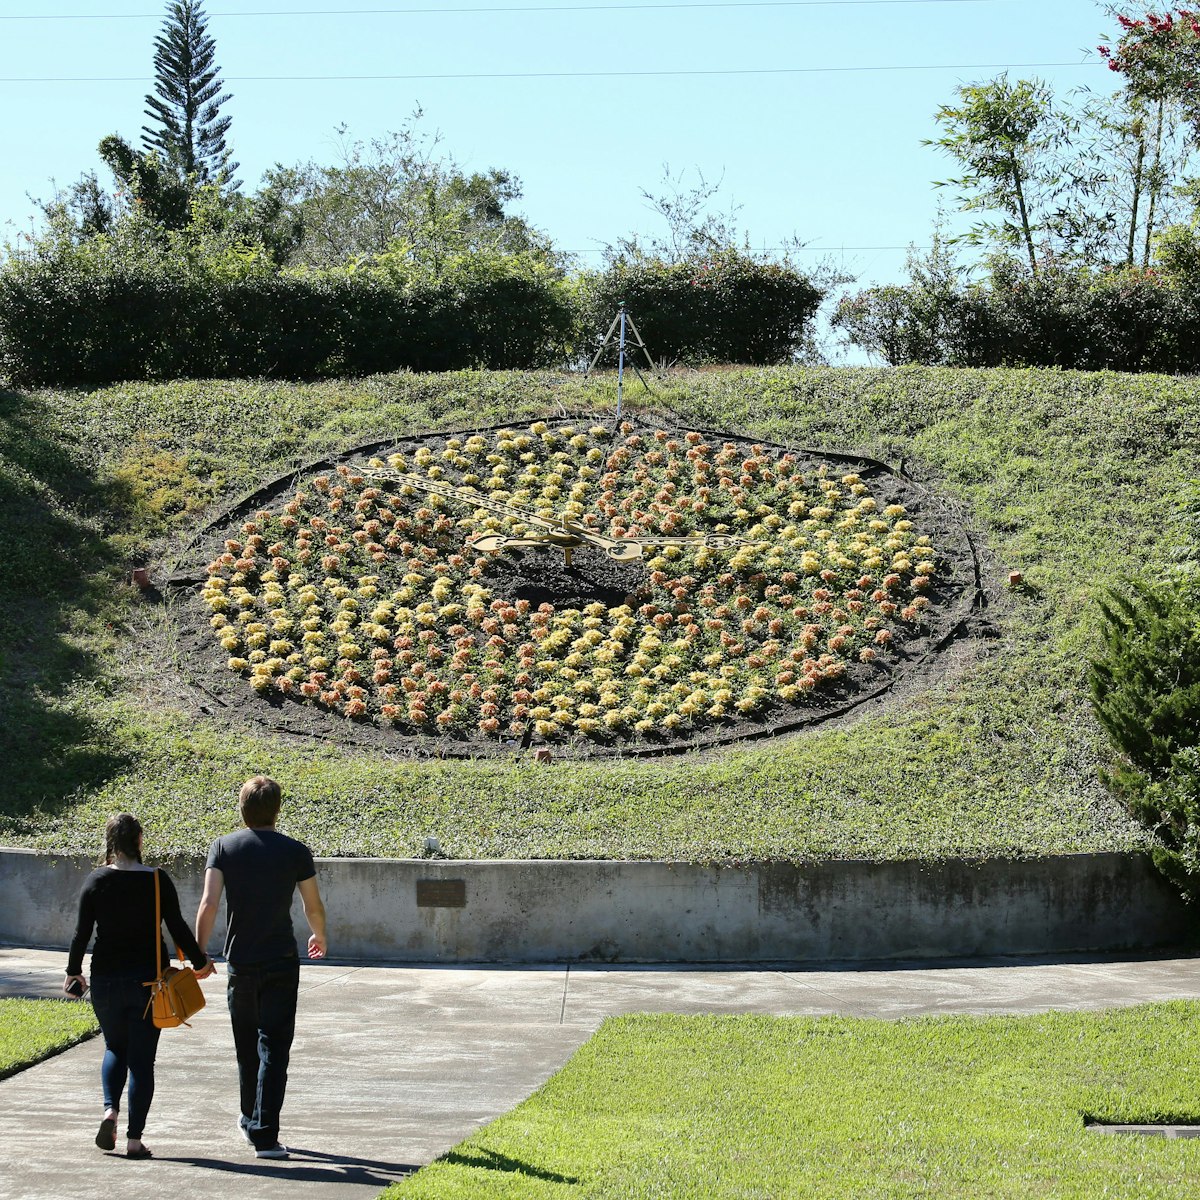 ORLANDO, FL, USA - OCTOBER 29: Visitors admire the larger than life living floral clock at Harry P. Leu Gardens, a destination garden with over 40 diverse plant collections as seen on October 29, 2017